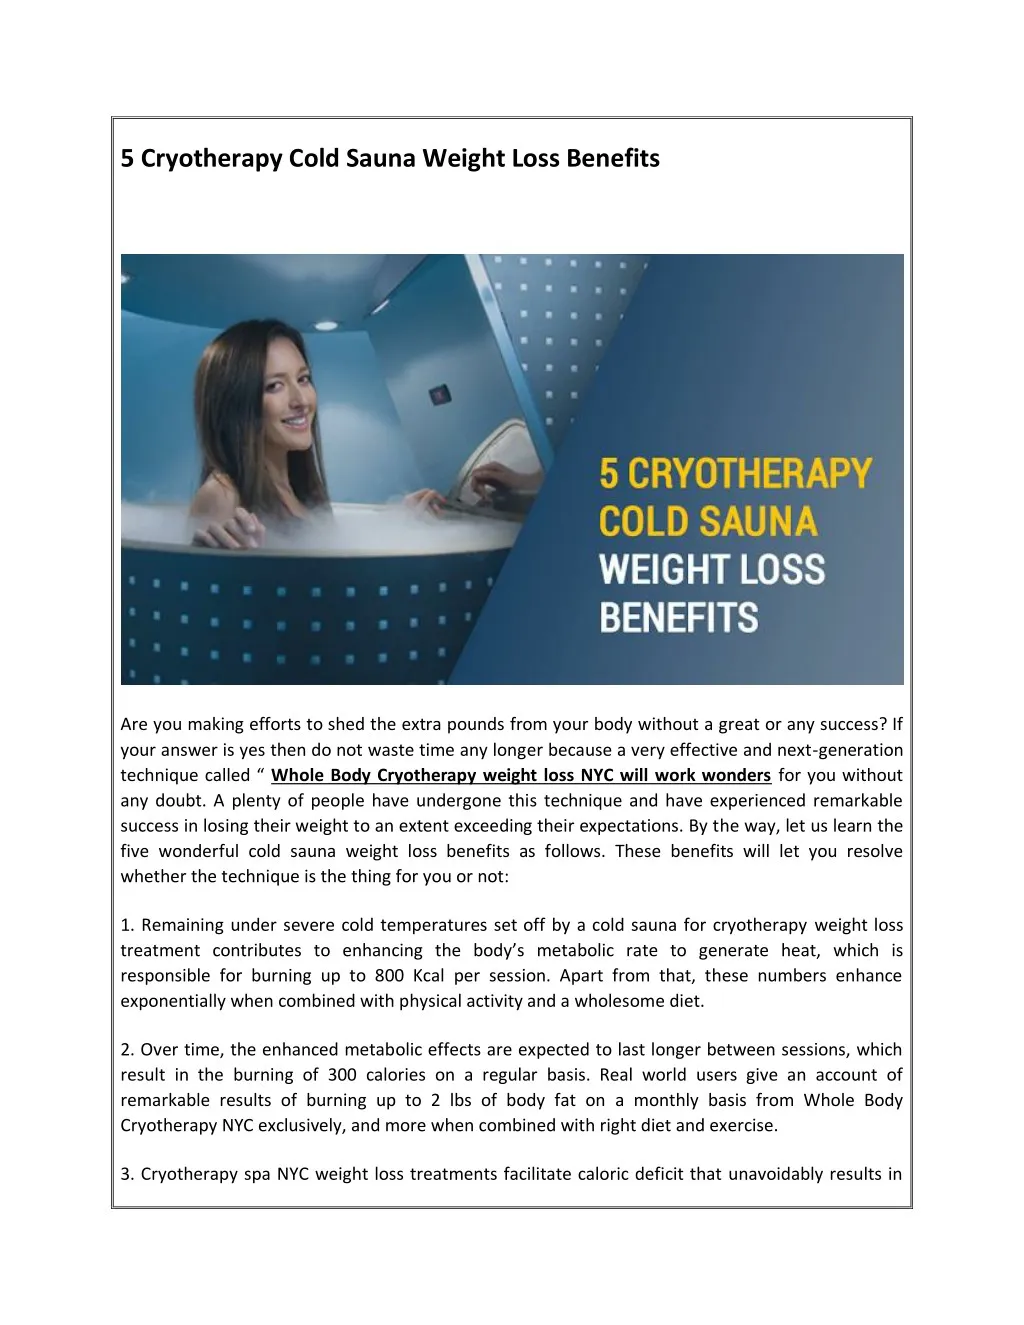 5 cryotherapy cold sauna weight loss benefits